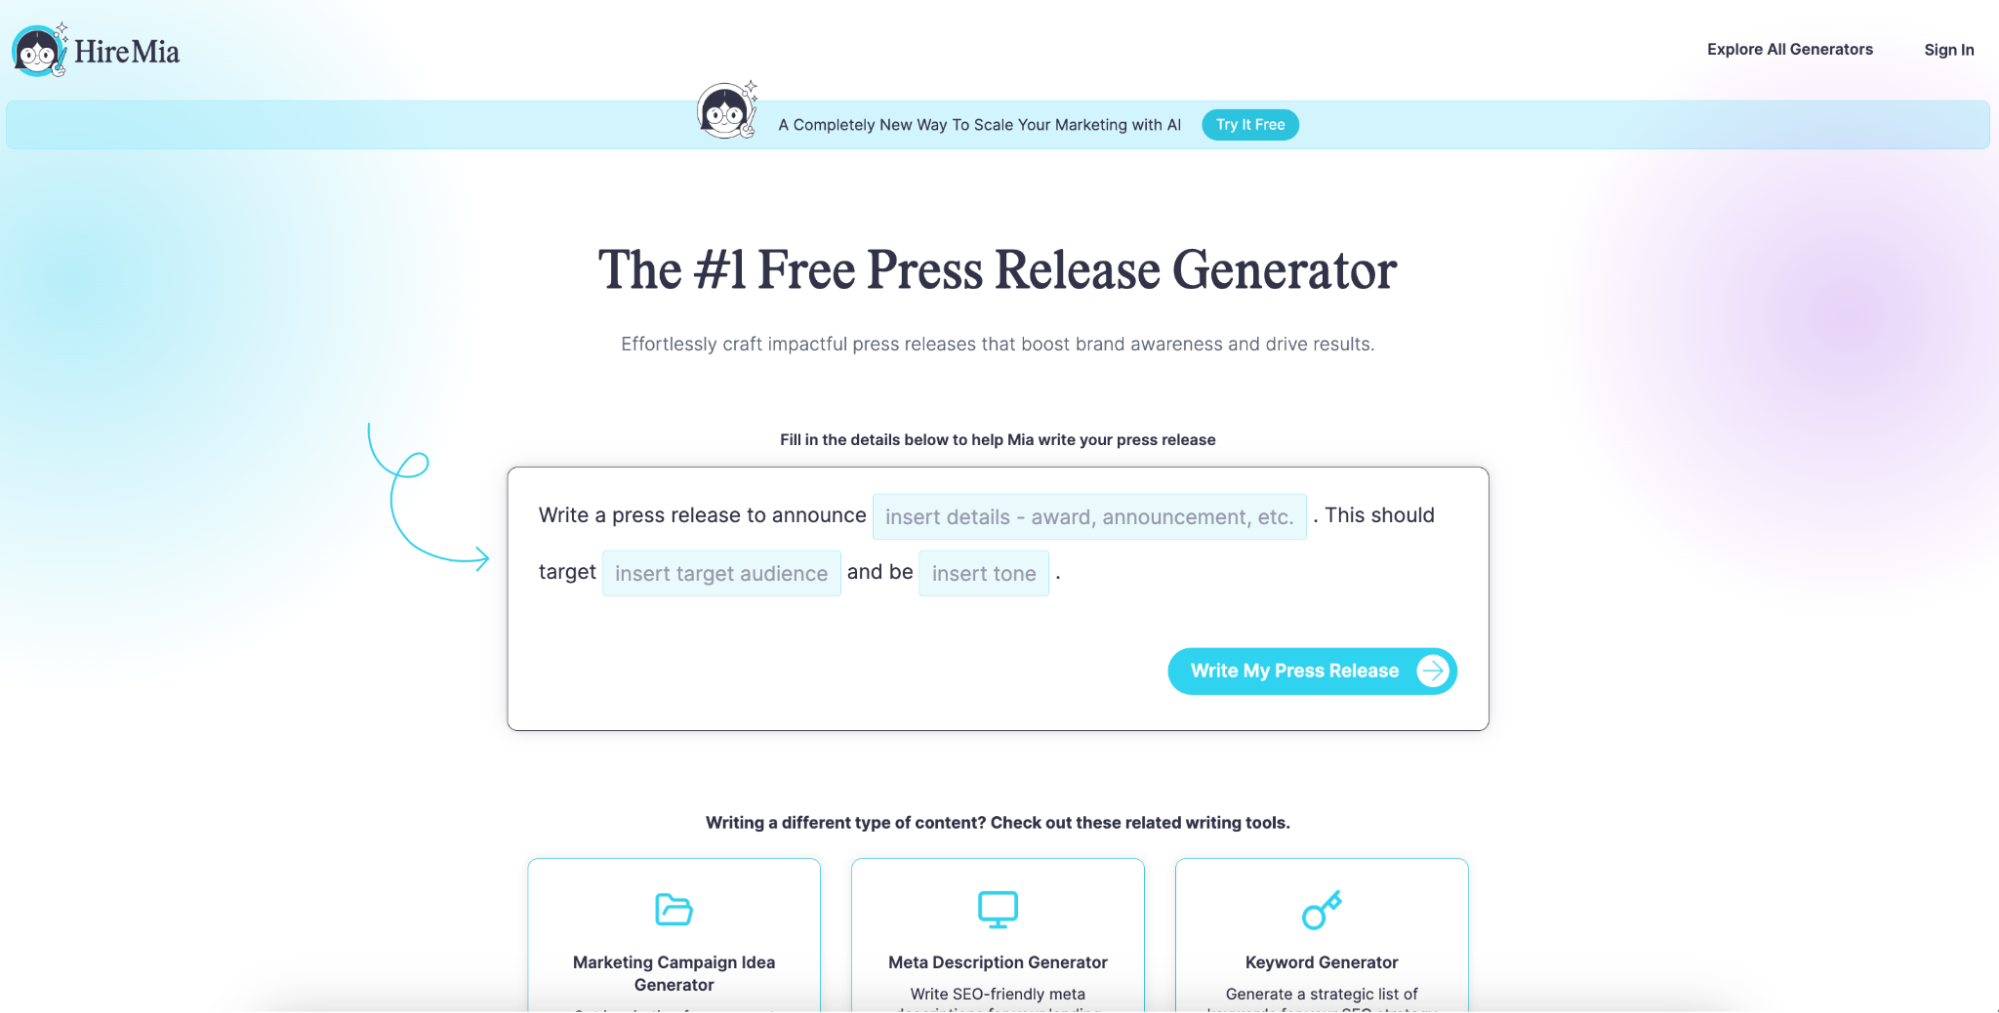 Nress Release Generator by Hire Mia